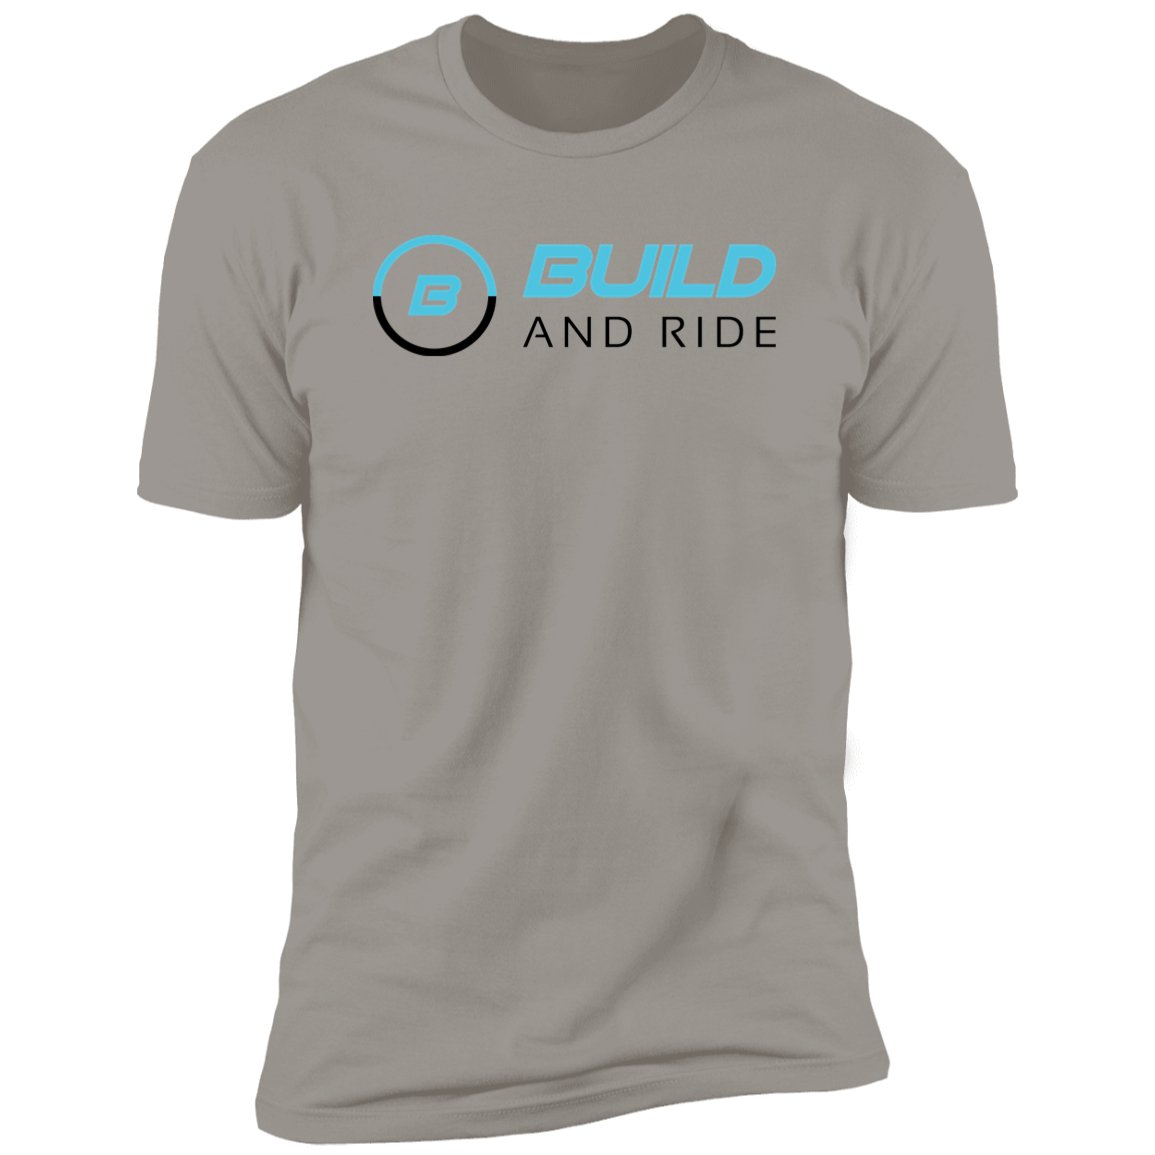 Build And Ride T-Shirt - Build And Ride